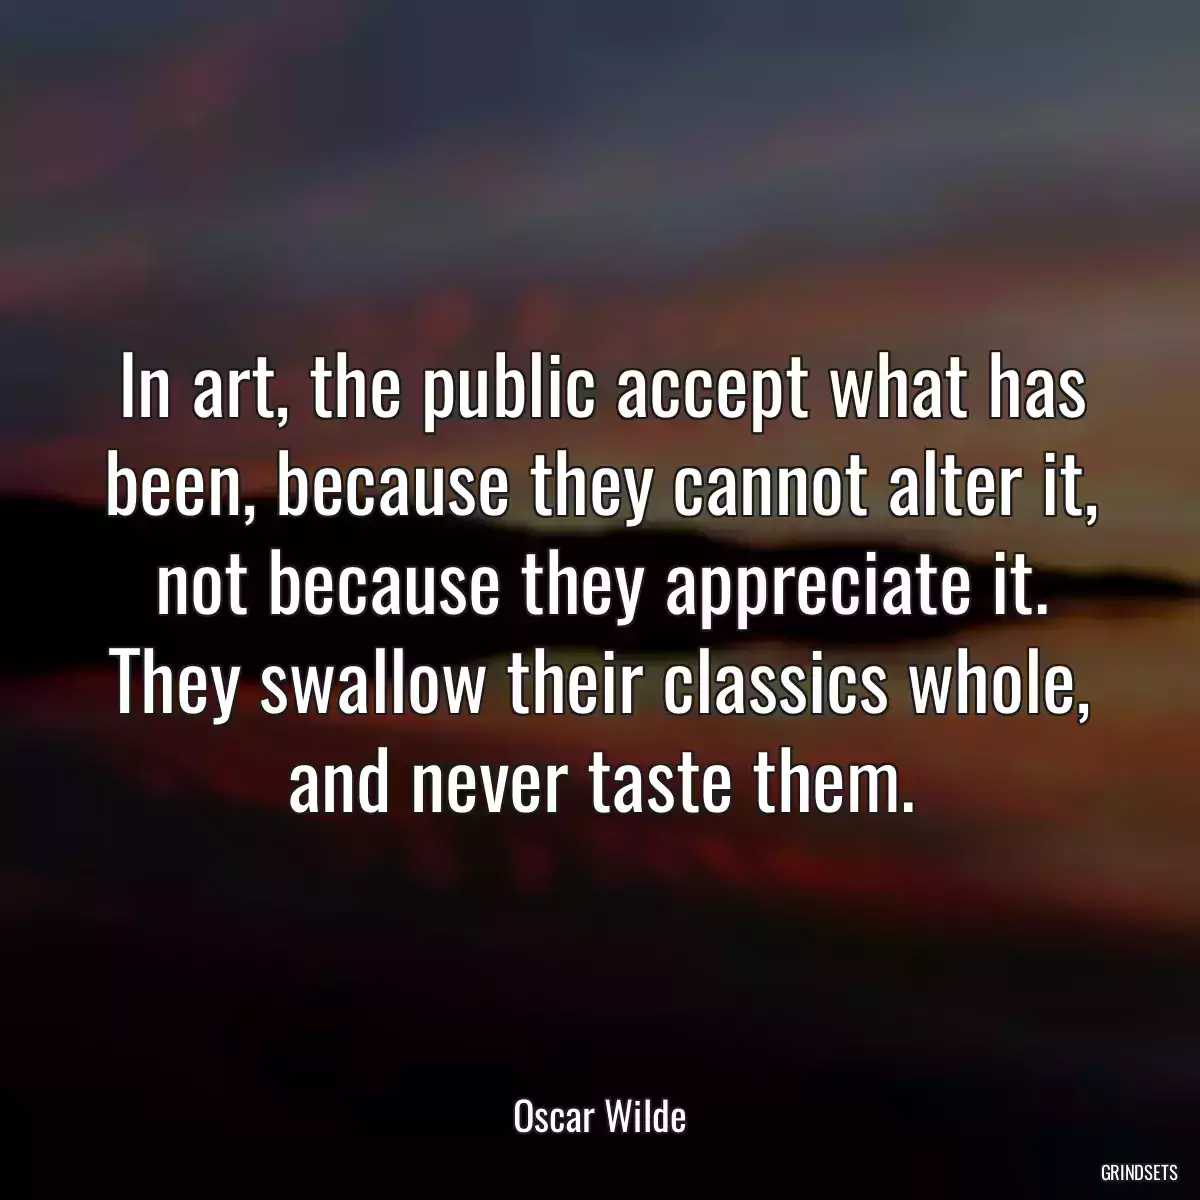 In art, the public accept what has been, because they cannot alter it, not because they appreciate it. They swallow their classics whole, and never taste them.